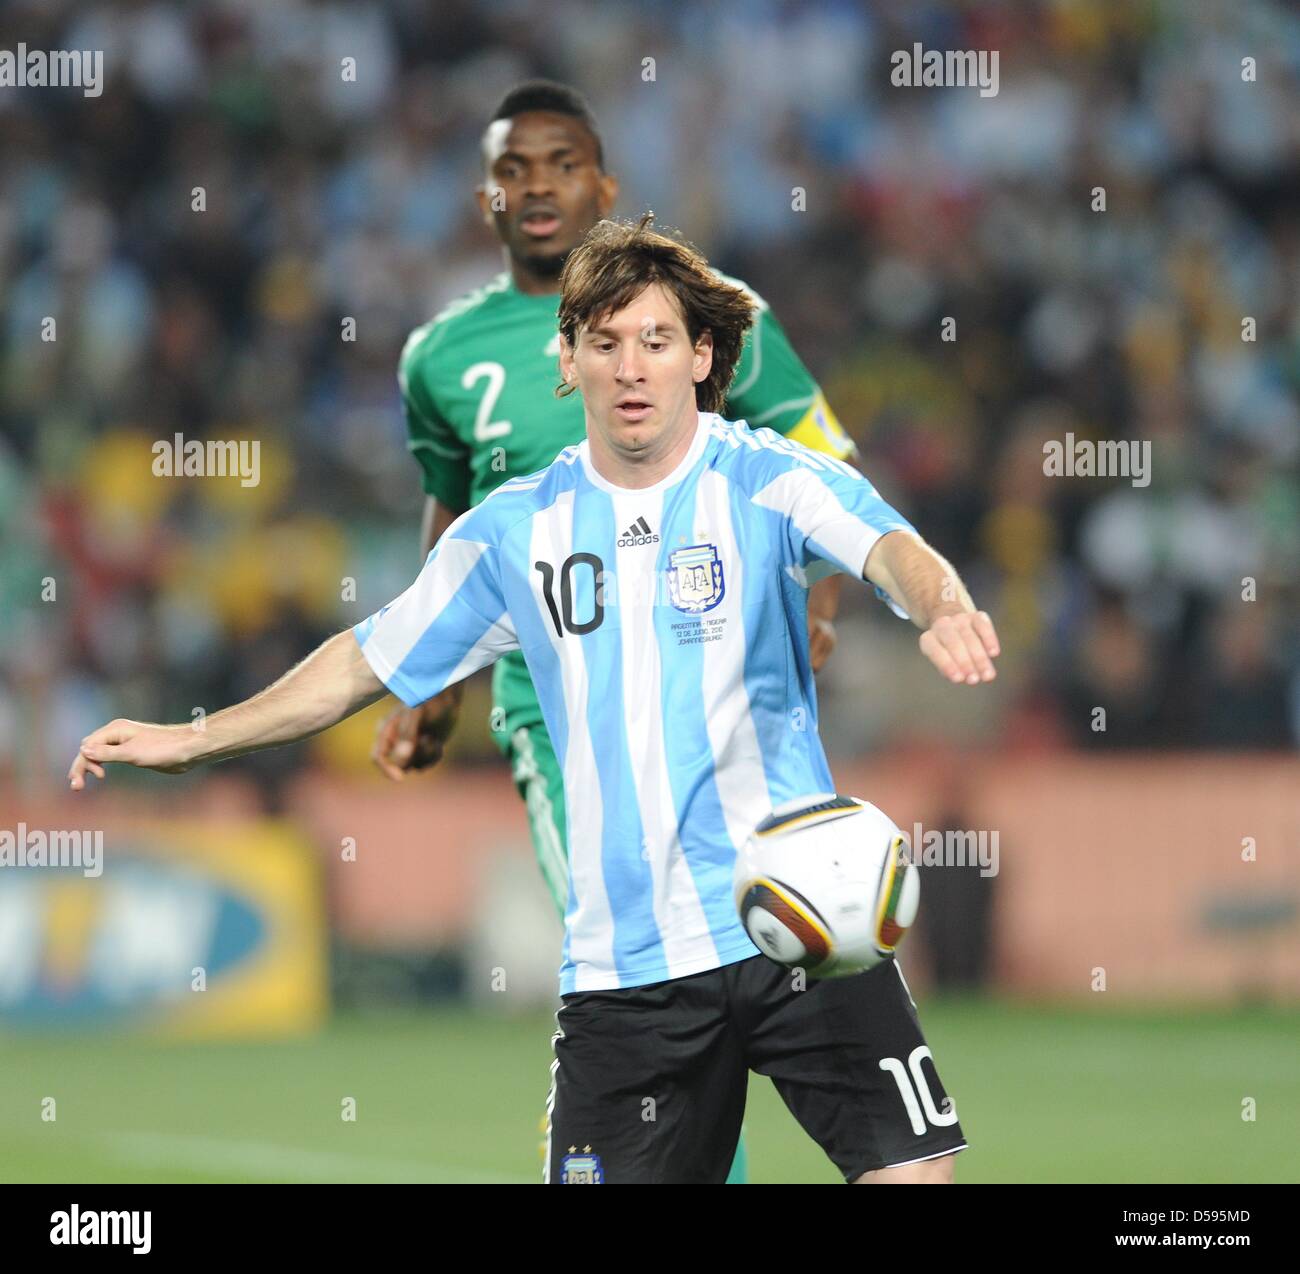 Argentina's Lionel Messi (front) vies for the ball with Nigeria's Joseph Yobo during the 2010 FIFA World Cup group B match between Argentina and Nigeria at Ellis Park stadium in Johannesburg, South Africa 12 June 2010. Argentina won 1-0. Photo: Achim Scheidemann - Please refer to http://dpaq.de/FIFA-WM2010-TC Stock Photo